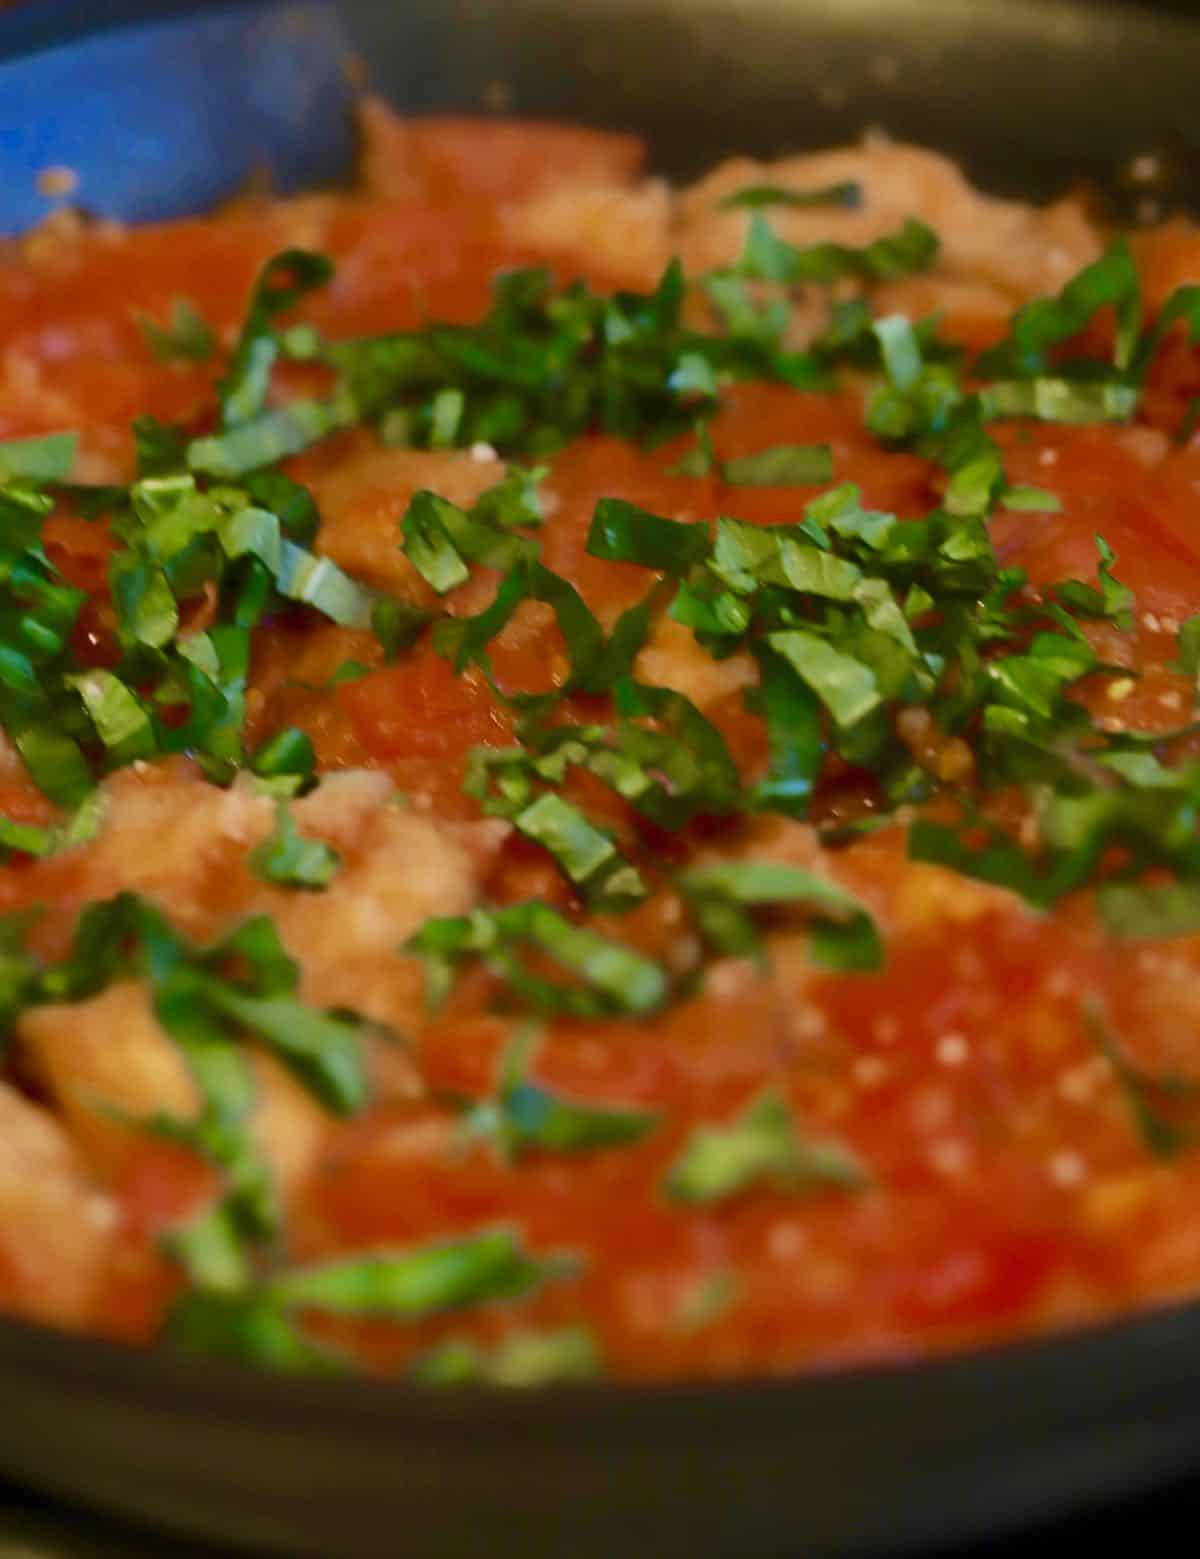 Fresh basil tops a mixture of tomatoes and bread cubes in a skillet.